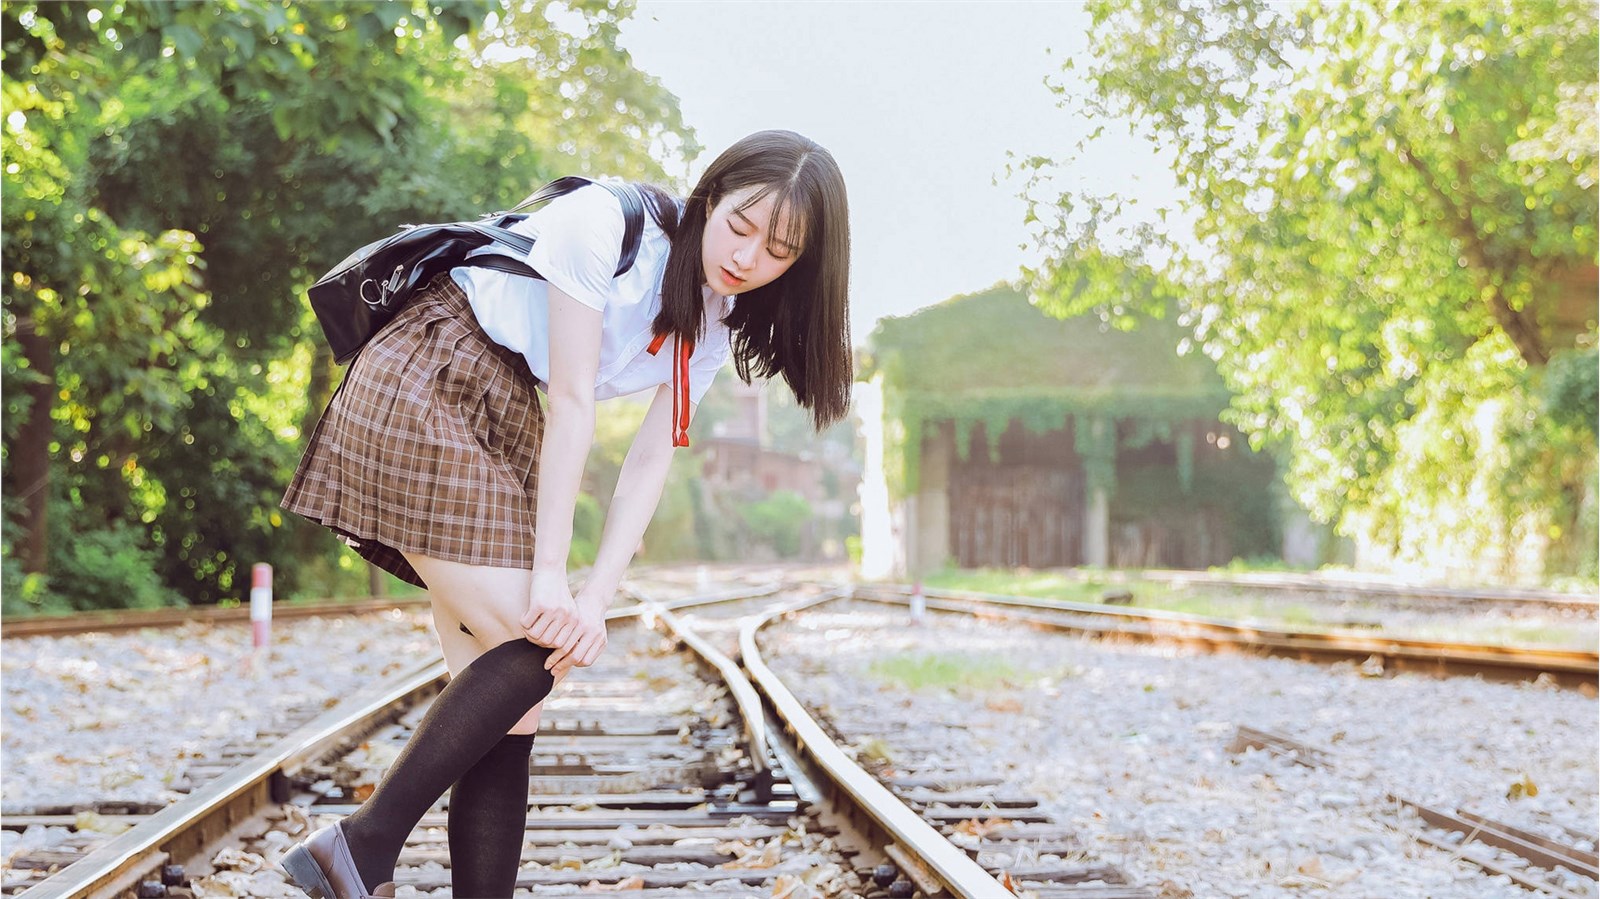 Pure primary school sister outdoor fresh photo(8)